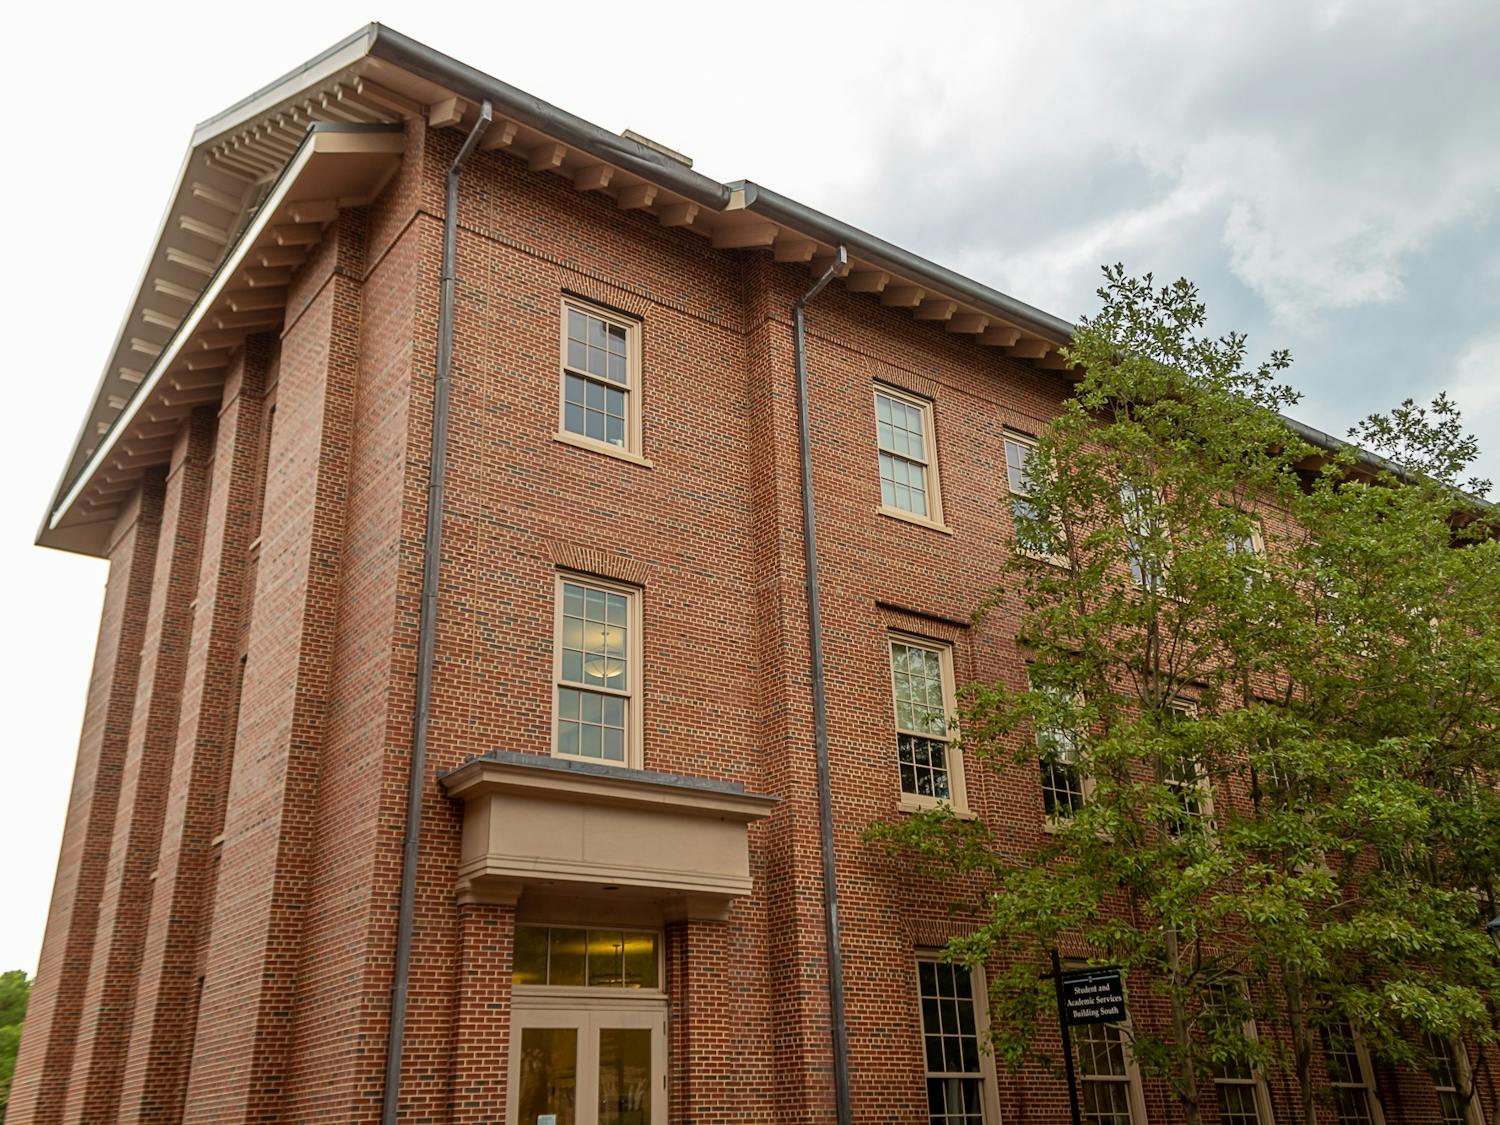 The Student Academic Services Building where the UNC LGBTQ+ Center is located, pictured on Wednesday, August 10, 2022.